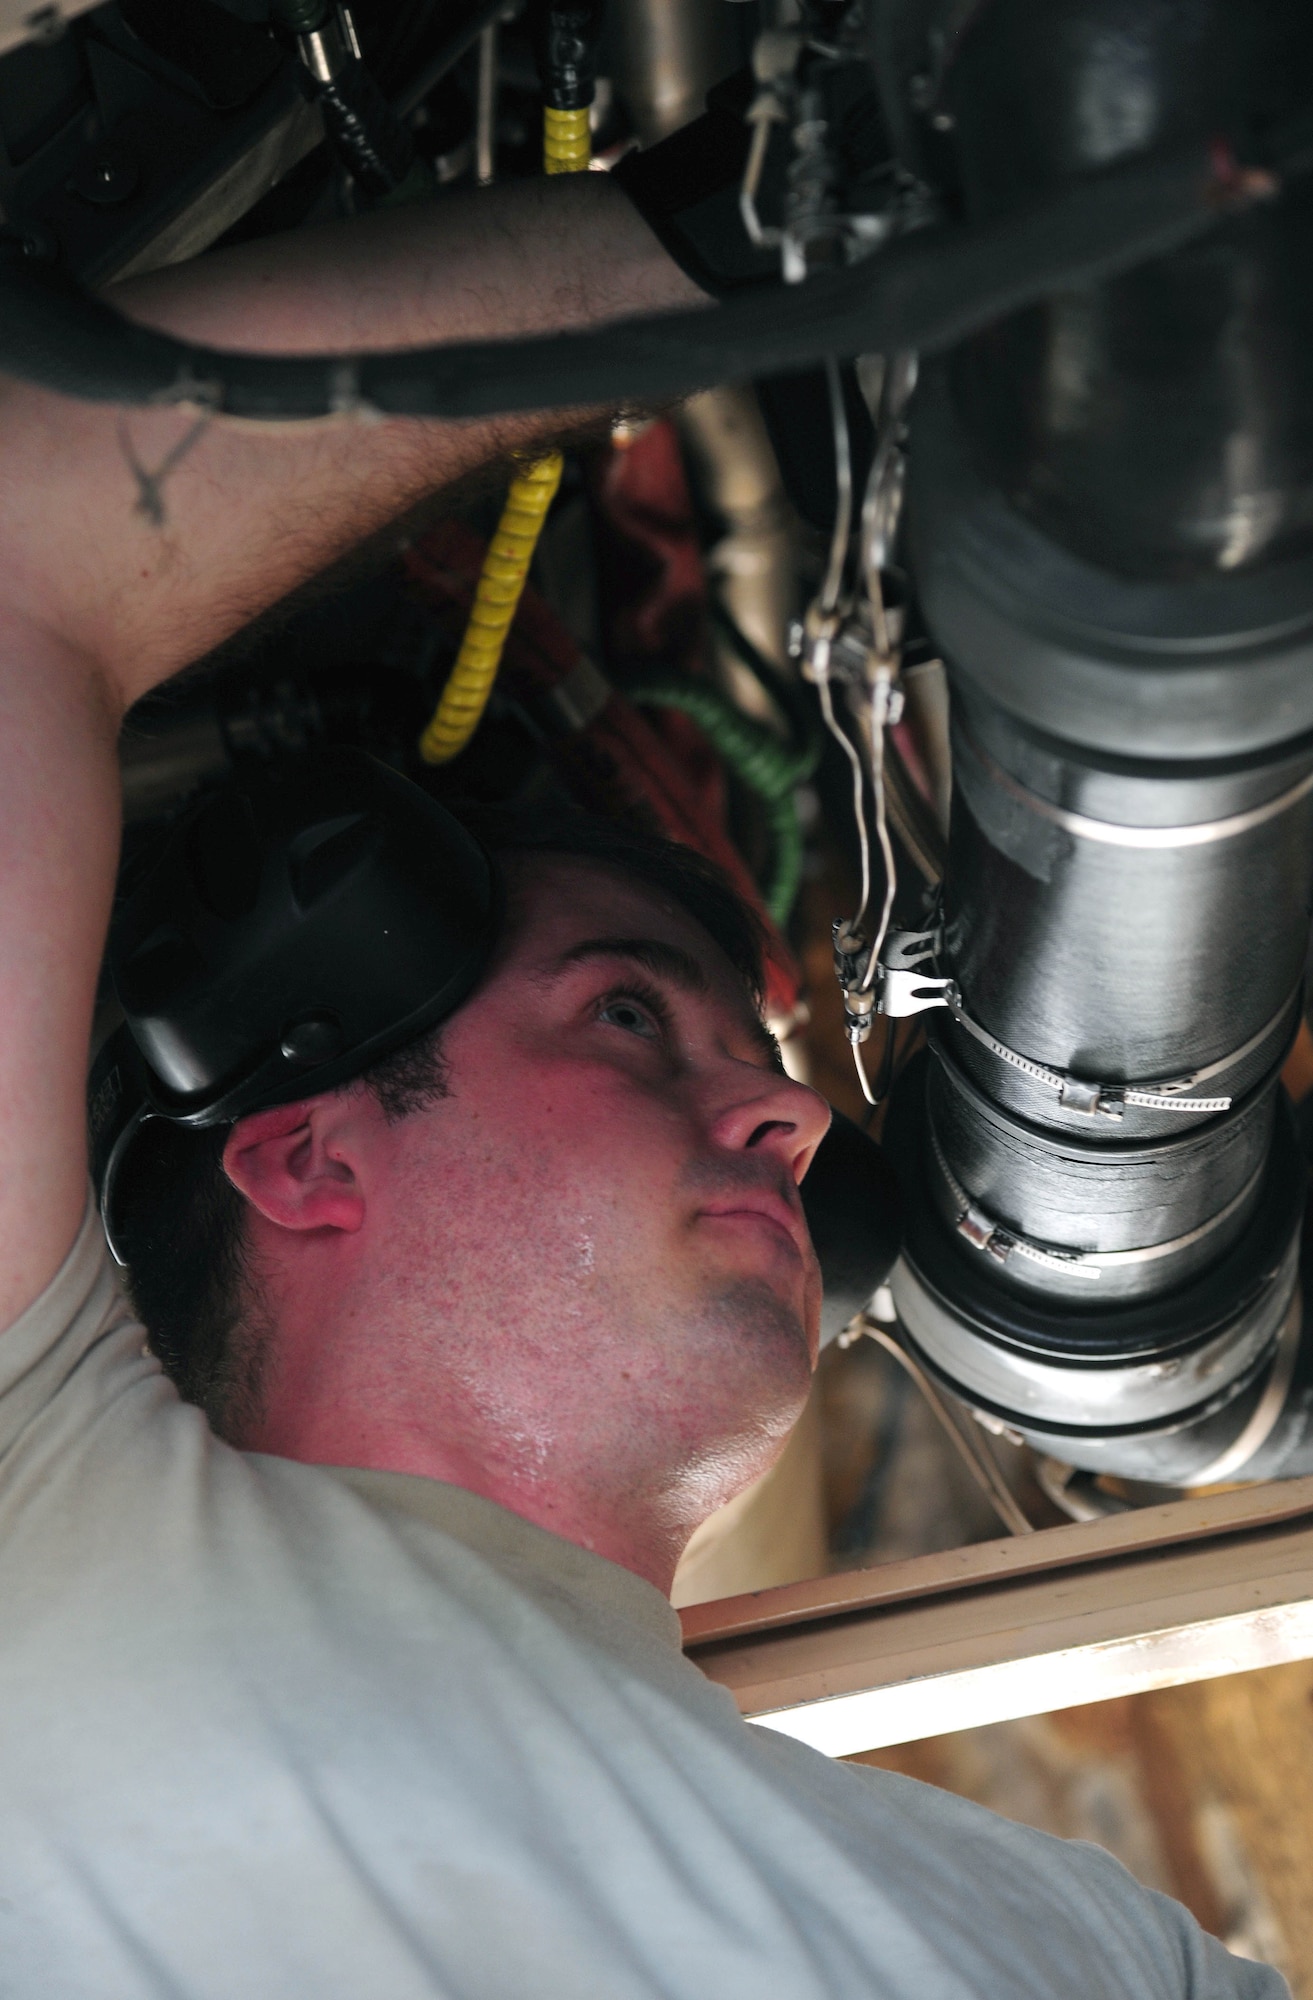 U.S. Air Force Staff Sgt. James Torrance, an electrical and environmental systems technician with the 131st Aircraft Maintenance Squadron, performs maintenance on a B-2 Spirit while deployed to an undisclosed location in the U.S. Pacific Command area of operations March 11, 2016. These deployments help maintain global stability and security, while enabling aircrew to become familiar with operating in different regions. (U.S. Air Force photo by Senior Airman Joel Pfiester)